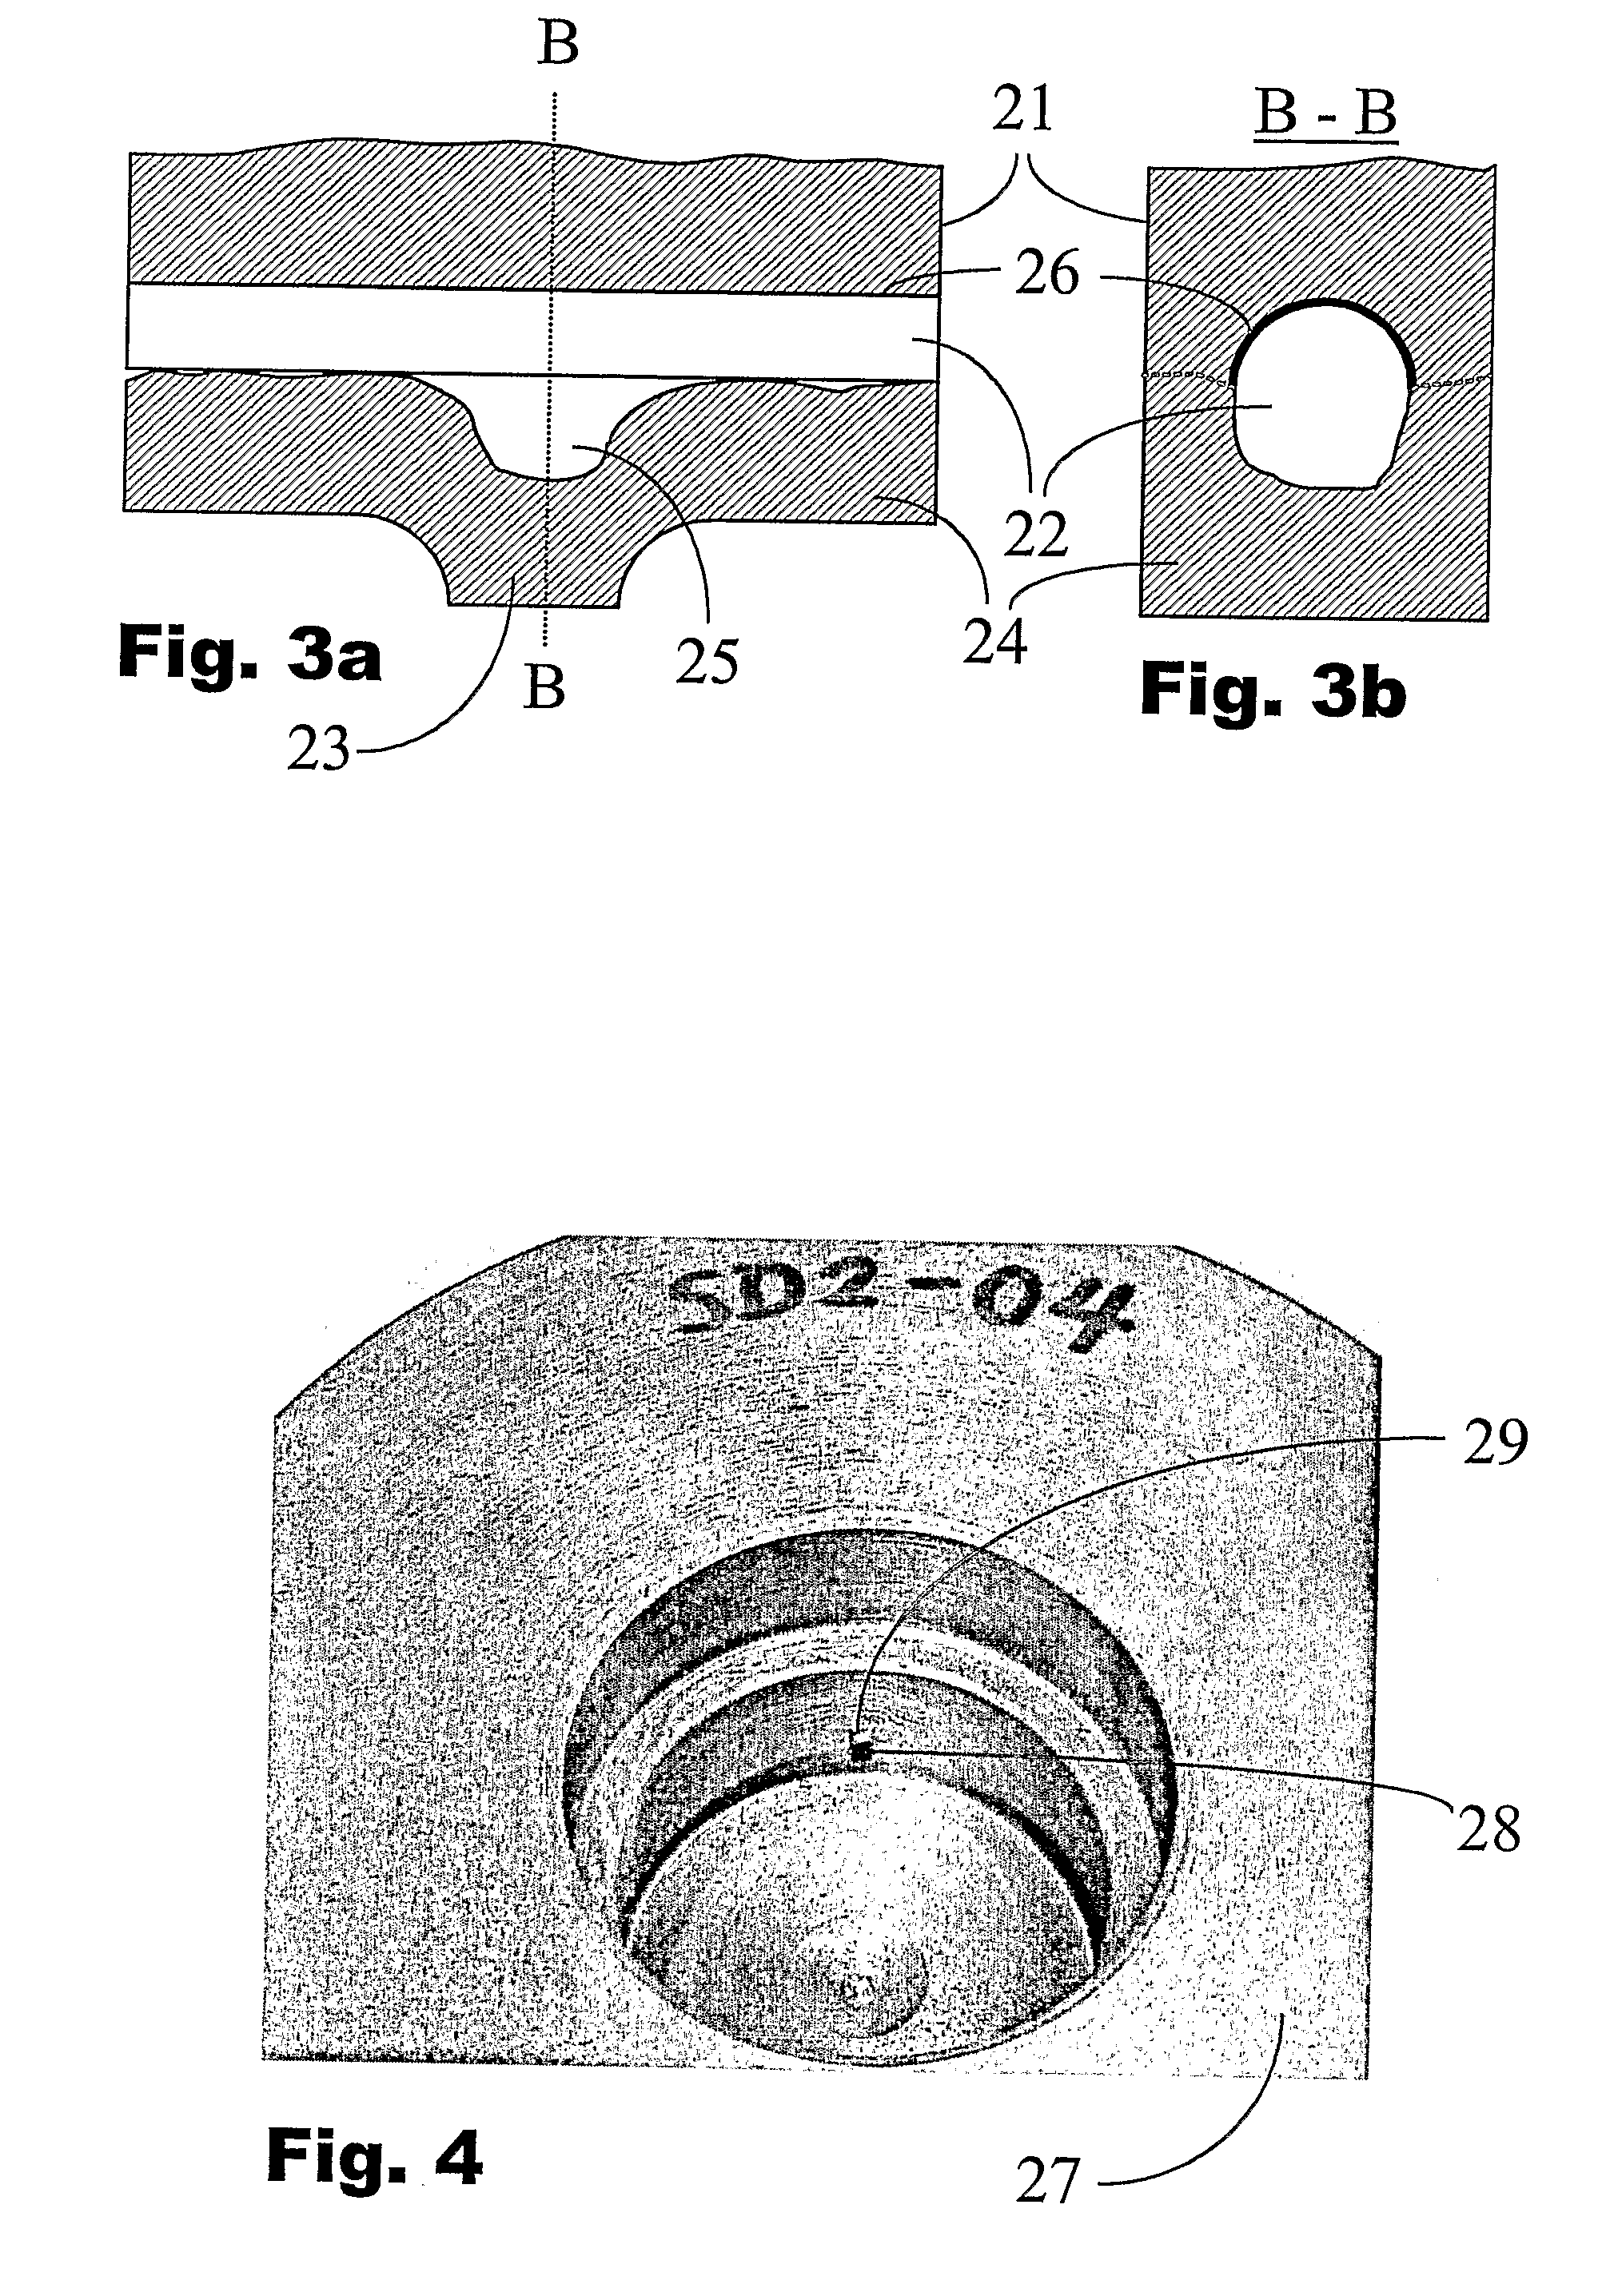 Method for spray forming a metal component and a spray formed metal component